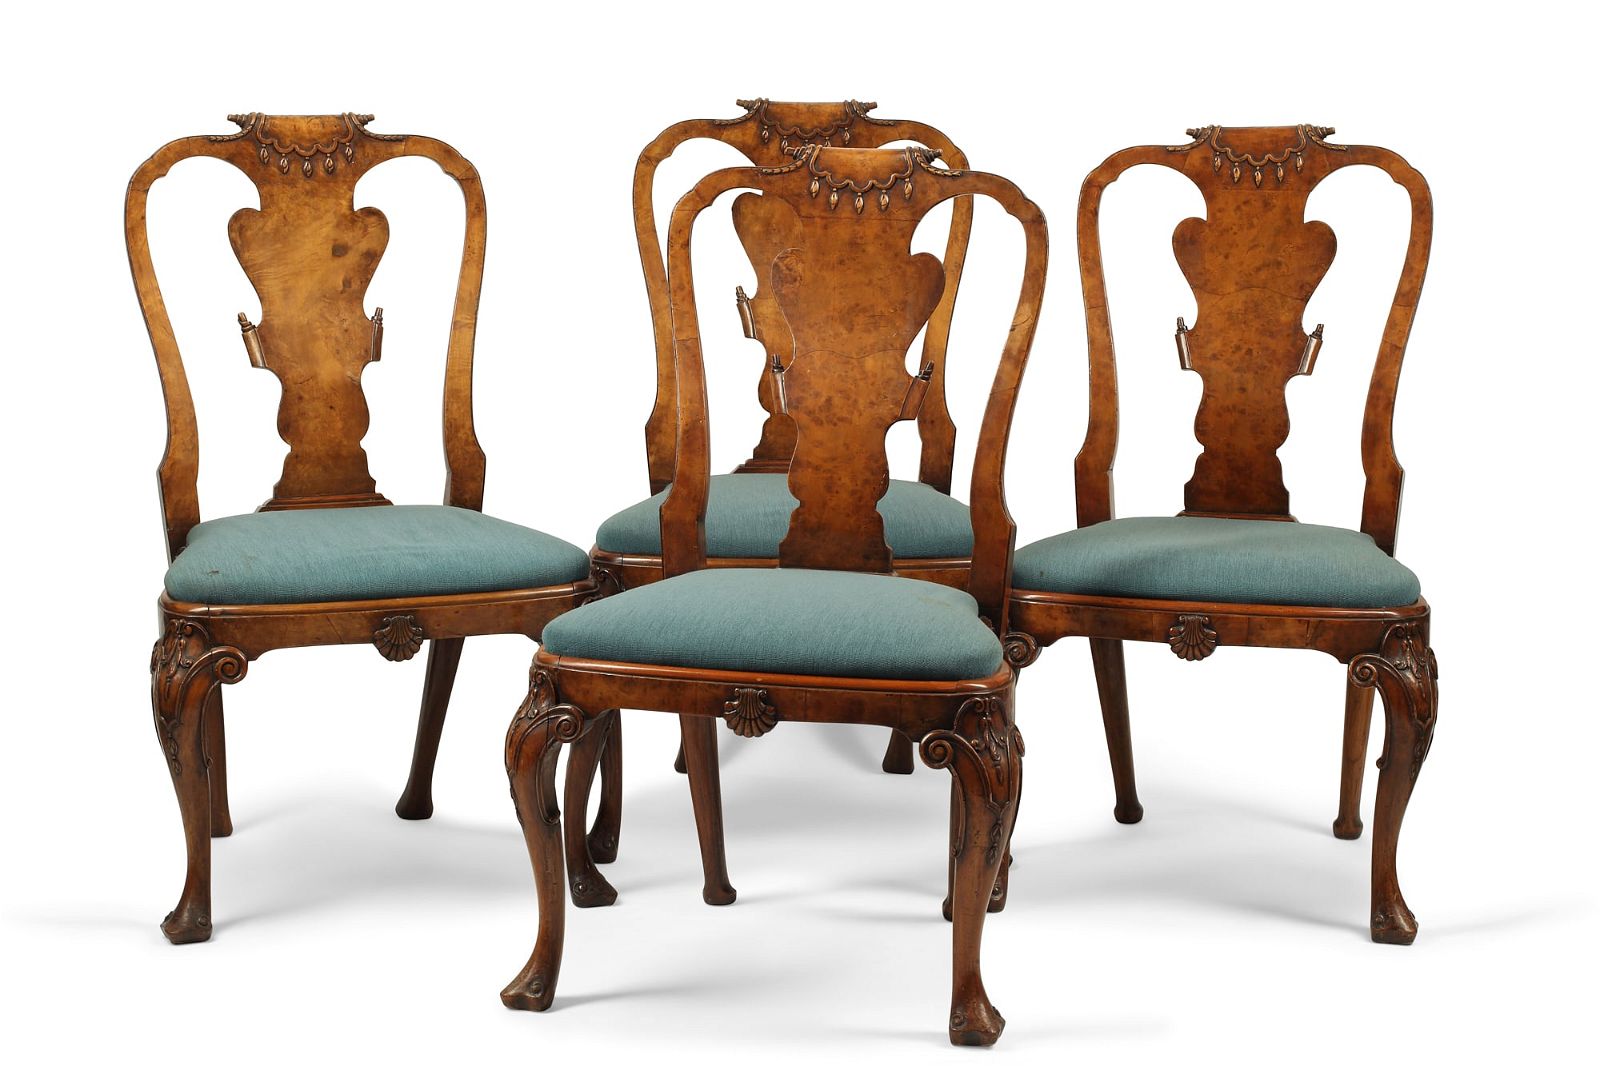 FOUR GEORGE II STYLE DINING CHAIRSA 2fb3cff